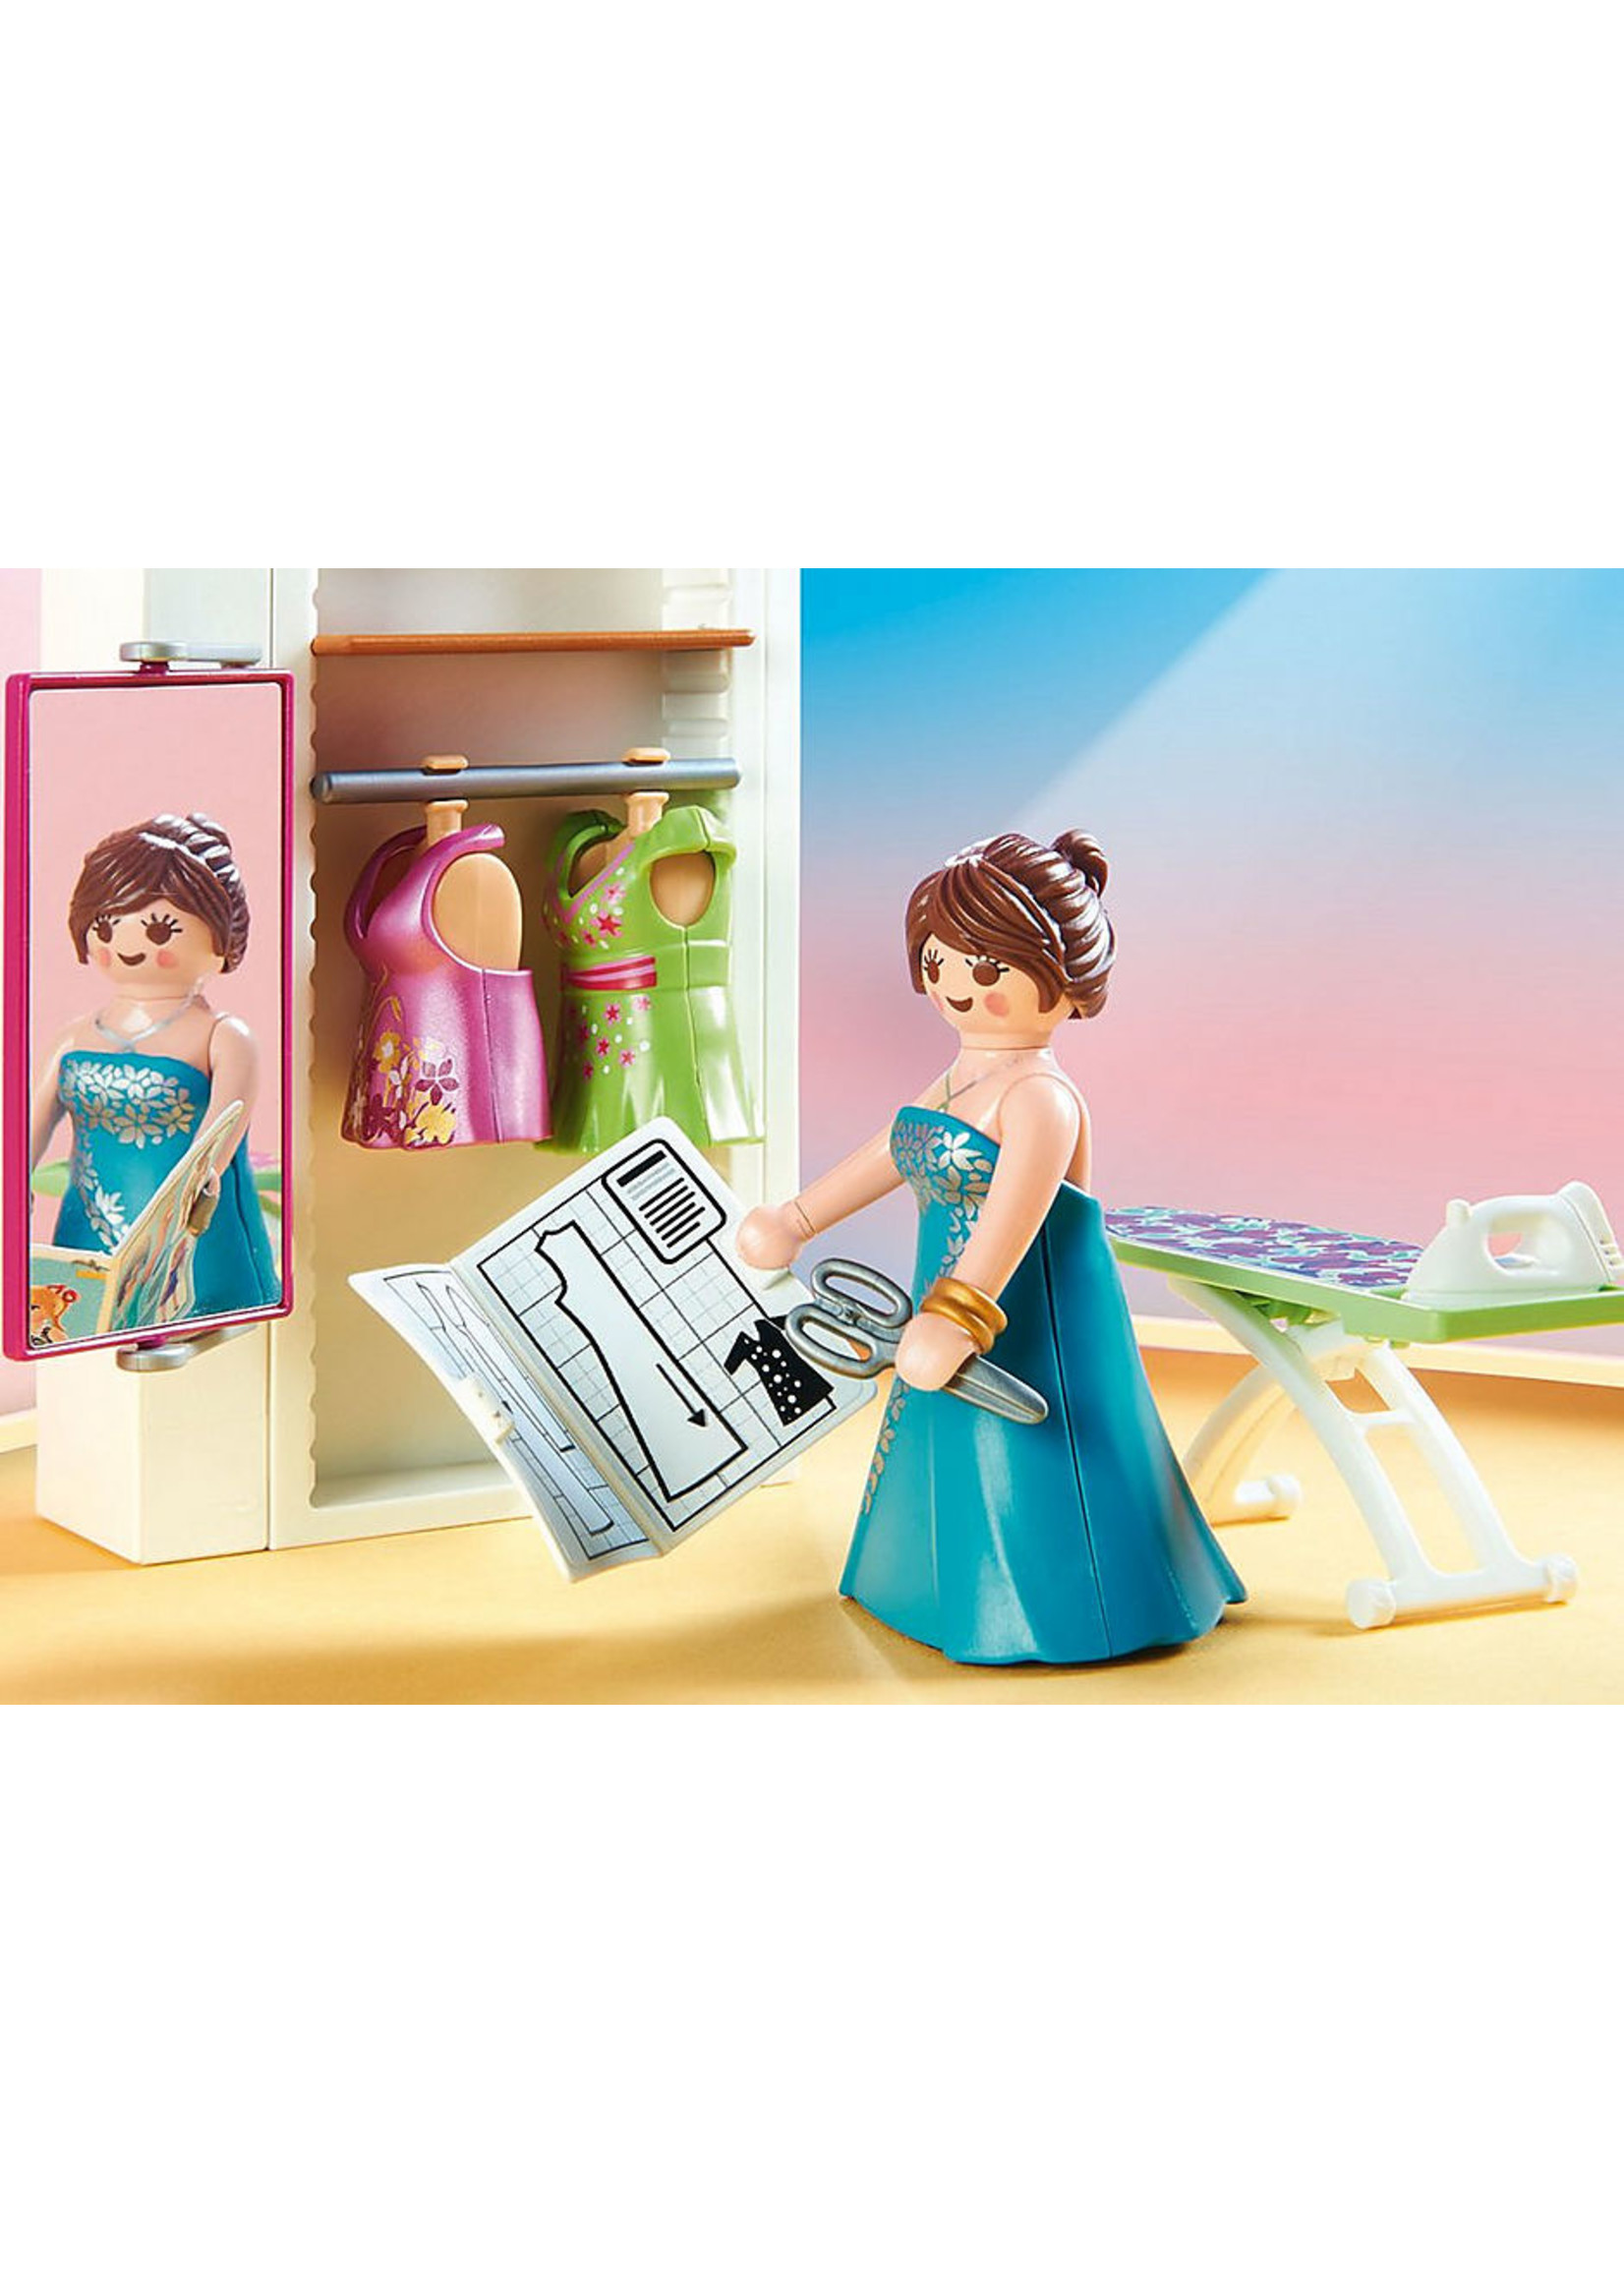 Playmobil 70208 - Bedroom with Sewing Corner